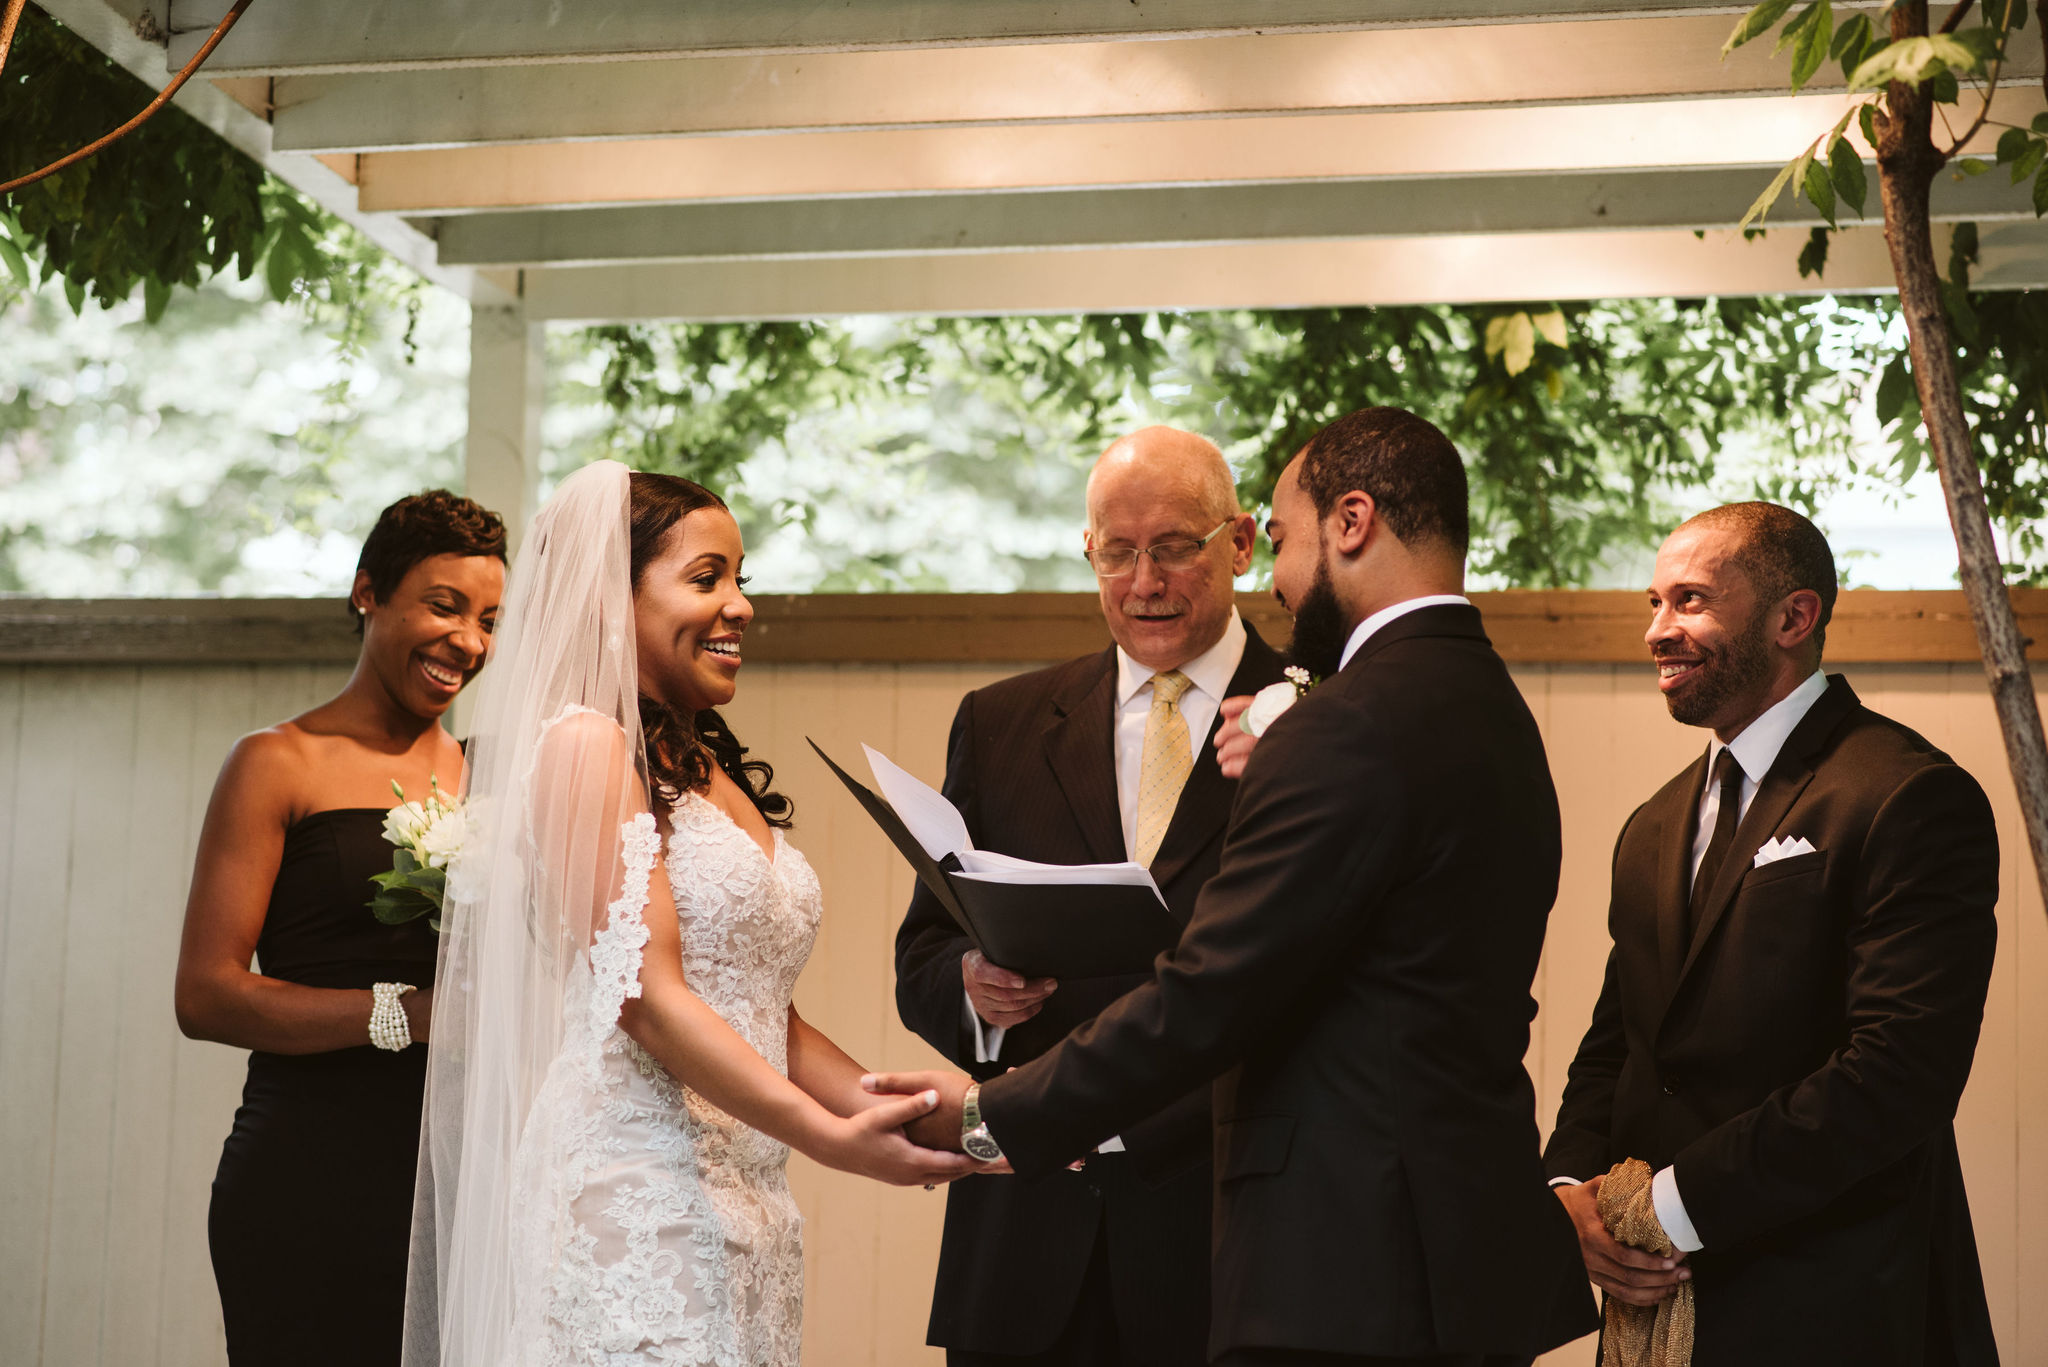  Baltimore, Maryland Wedding Photographer, Mount Vernon, Chase Court, Classic, Outdoor Ceremony, Garden, Romantic, Bride and groom Exchanging Vows, Lace Wedding Dress, Lace Bridal Veil 